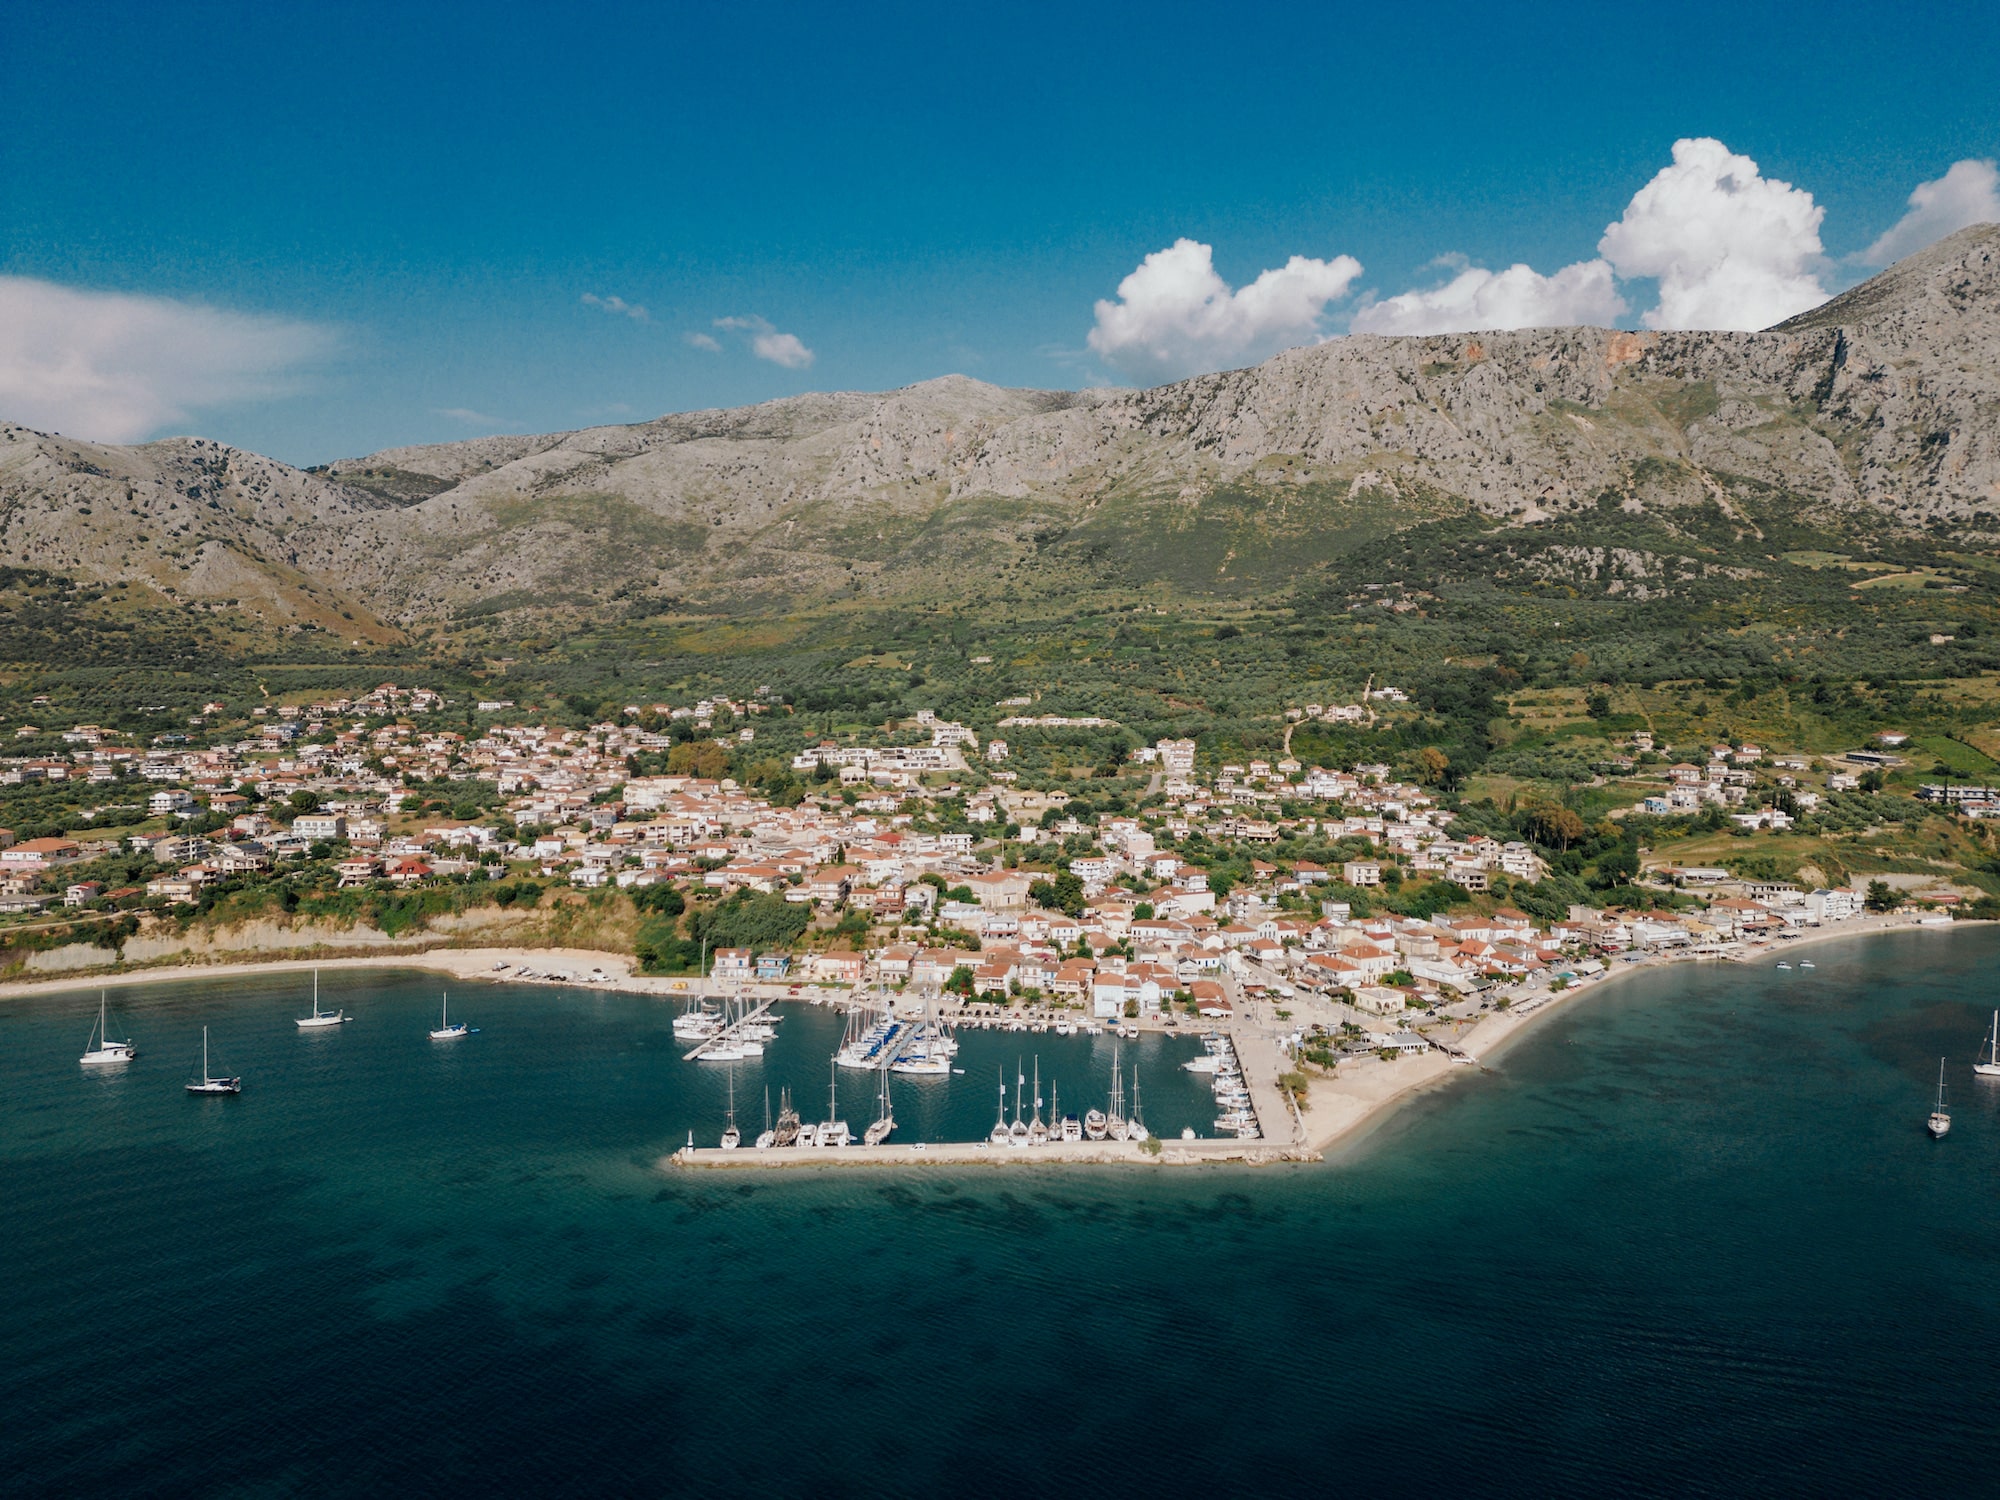 A panoramic photo of Paleros and its port. The image serves as a cover photo for an article about the best things to do in Paleros, written for the Estia Ionian Villas blog.